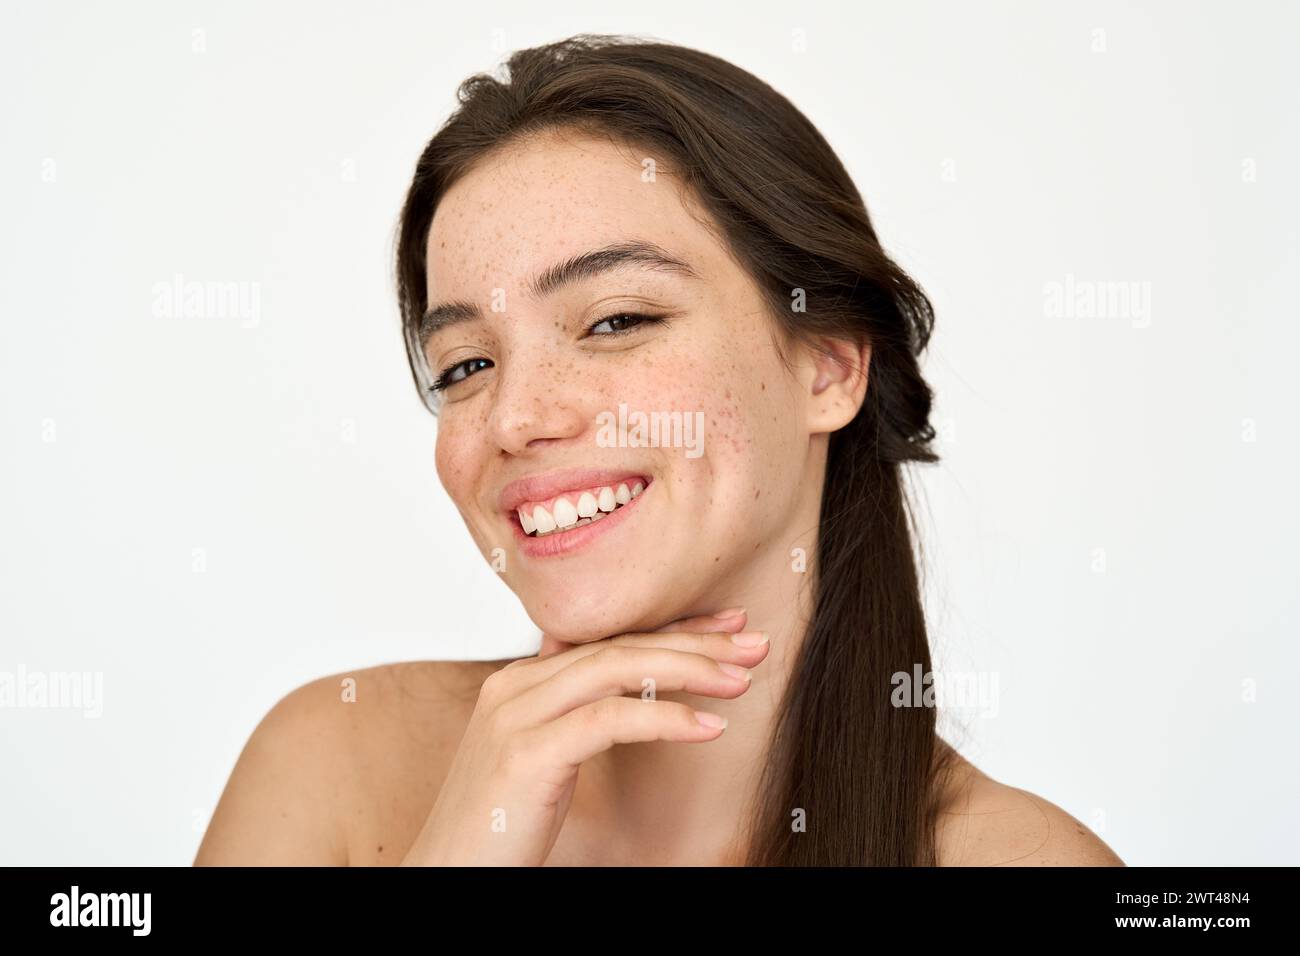 Happy Hispanic young woman with freckles on face isolated on white. Portrait. Stock Photo